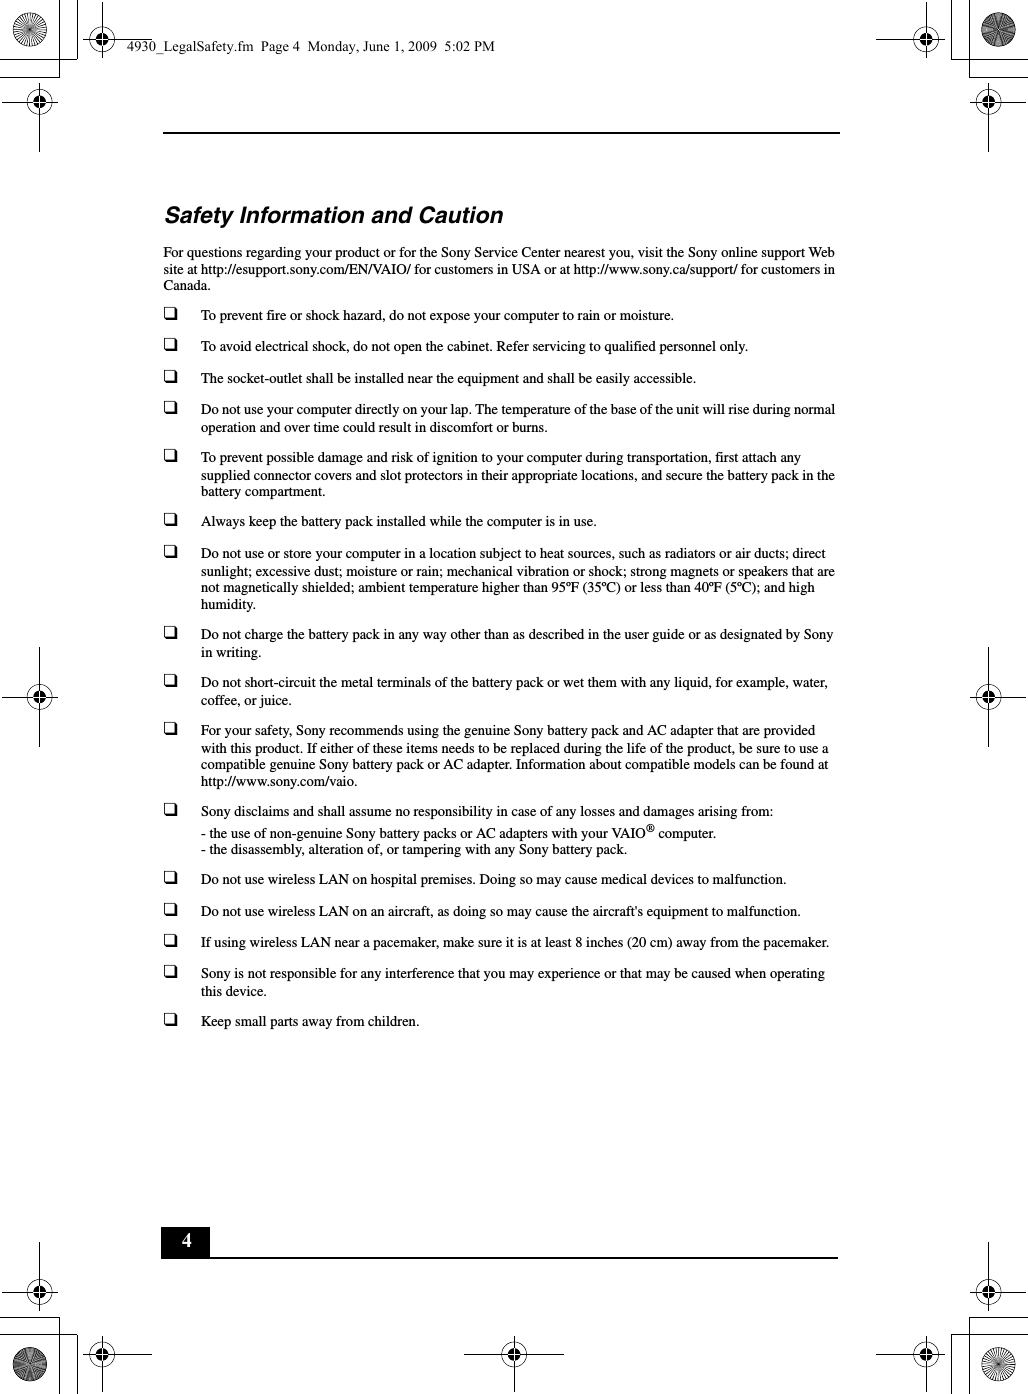 4Safety Information and CautionFor questions regarding your product or for the Sony Service Center nearest you, visit the Sony online support Web site at http://esupport.sony.com/EN/VAIO/ for customers in USA or at http://www.sony.ca/support/ for customers in Canada.❑To prevent fire or shock hazard, do not expose your computer to rain or moisture.❑To avoid electrical shock, do not open the cabinet. Refer servicing to qualified personnel only.❑The socket-outlet shall be installed near the equipment and shall be easily accessible.❑Do not use your computer directly on your lap. The temperature of the base of the unit will rise during normal operation and over time could result in discomfort or burns.❑To prevent possible damage and risk of ignition to your computer during transportation, first attach any supplied connector covers and slot protectors in their appropriate locations, and secure the battery pack in the battery compartment.❑Always keep the battery pack installed while the computer is in use.❑Do not use or store your computer in a location subject to heat sources, such as radiators or air ducts; direct sunlight; excessive dust; moisture or rain; mechanical vibration or shock; strong magnets or speakers that are not magnetically shielded; ambient temperature higher than 95ºF (35ºC) or less than 40ºF (5ºC); and high humidity.❑Do not charge the battery pack in any way other than as described in the user guide or as designated by Sony in writing.❑Do not short-circuit the metal terminals of the battery pack or wet them with any liquid, for example, water, coffee, or juice.❑For your safety, Sony recommends using the genuine Sony battery pack and AC adapter that are provided with this product. If either of these items needs to be replaced during the life of the product, be sure to use a compatible genuine Sony battery pack or AC adapter. Information about compatible models can be found at http://www.sony.com/vaio.❑Sony disclaims and shall assume no responsibility in case of any losses and damages arising from:- the use of non-genuine Sony battery packs or AC adapters with your VAIO® computer.- the disassembly, alteration of, or tampering with any Sony battery pack.❑Do not use wireless LAN on hospital premises. Doing so may cause medical devices to malfunction.❑Do not use wireless LAN on an aircraft, as doing so may cause the aircraft&apos;s equipment to malfunction.❑If using wireless LAN near a pacemaker, make sure it is at least 8 inches (20 cm) away from the pacemaker.❑Sony is not responsible for any interference that you may experience or that may be caused when operating this device.❑Keep small parts away from children.4930_LegalSafety.fm  Page 4  Monday, June 1, 2009  5:02 PM